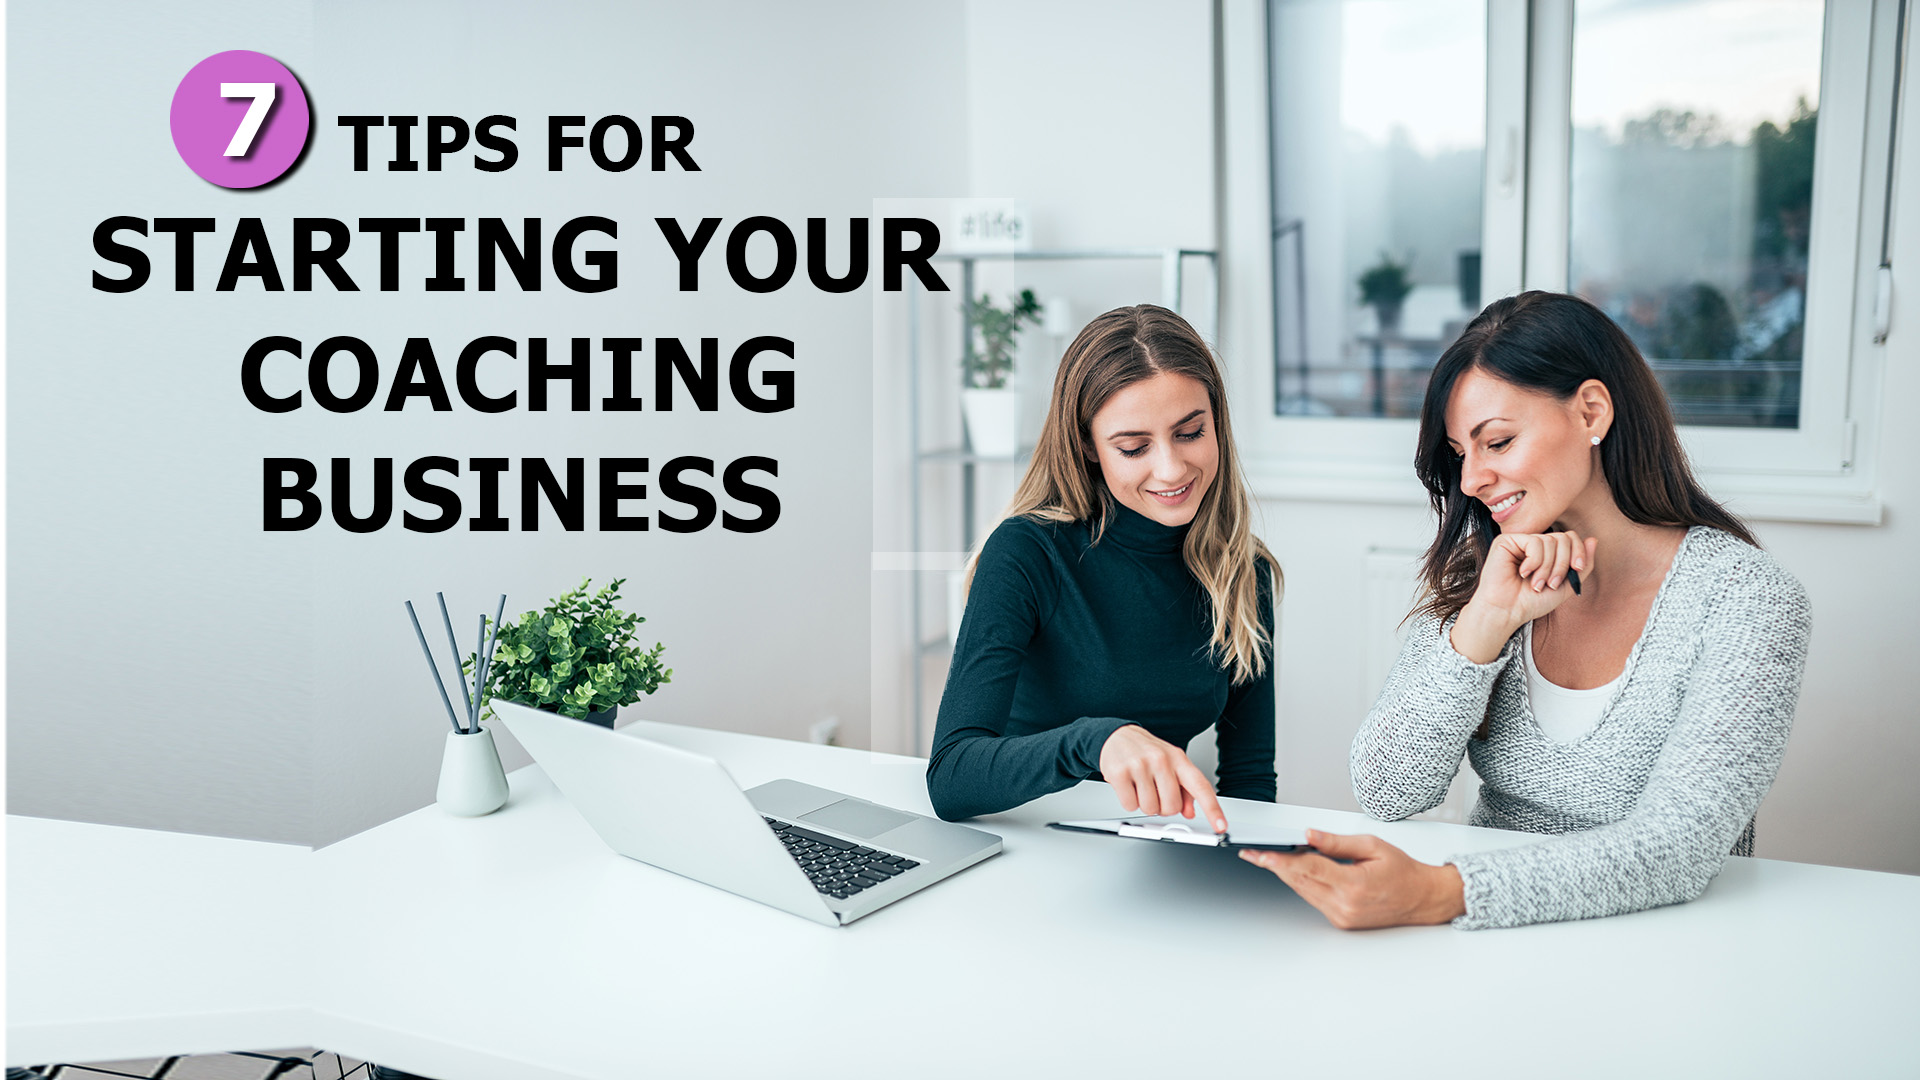 7 Tips for Starting Your Coaching Business